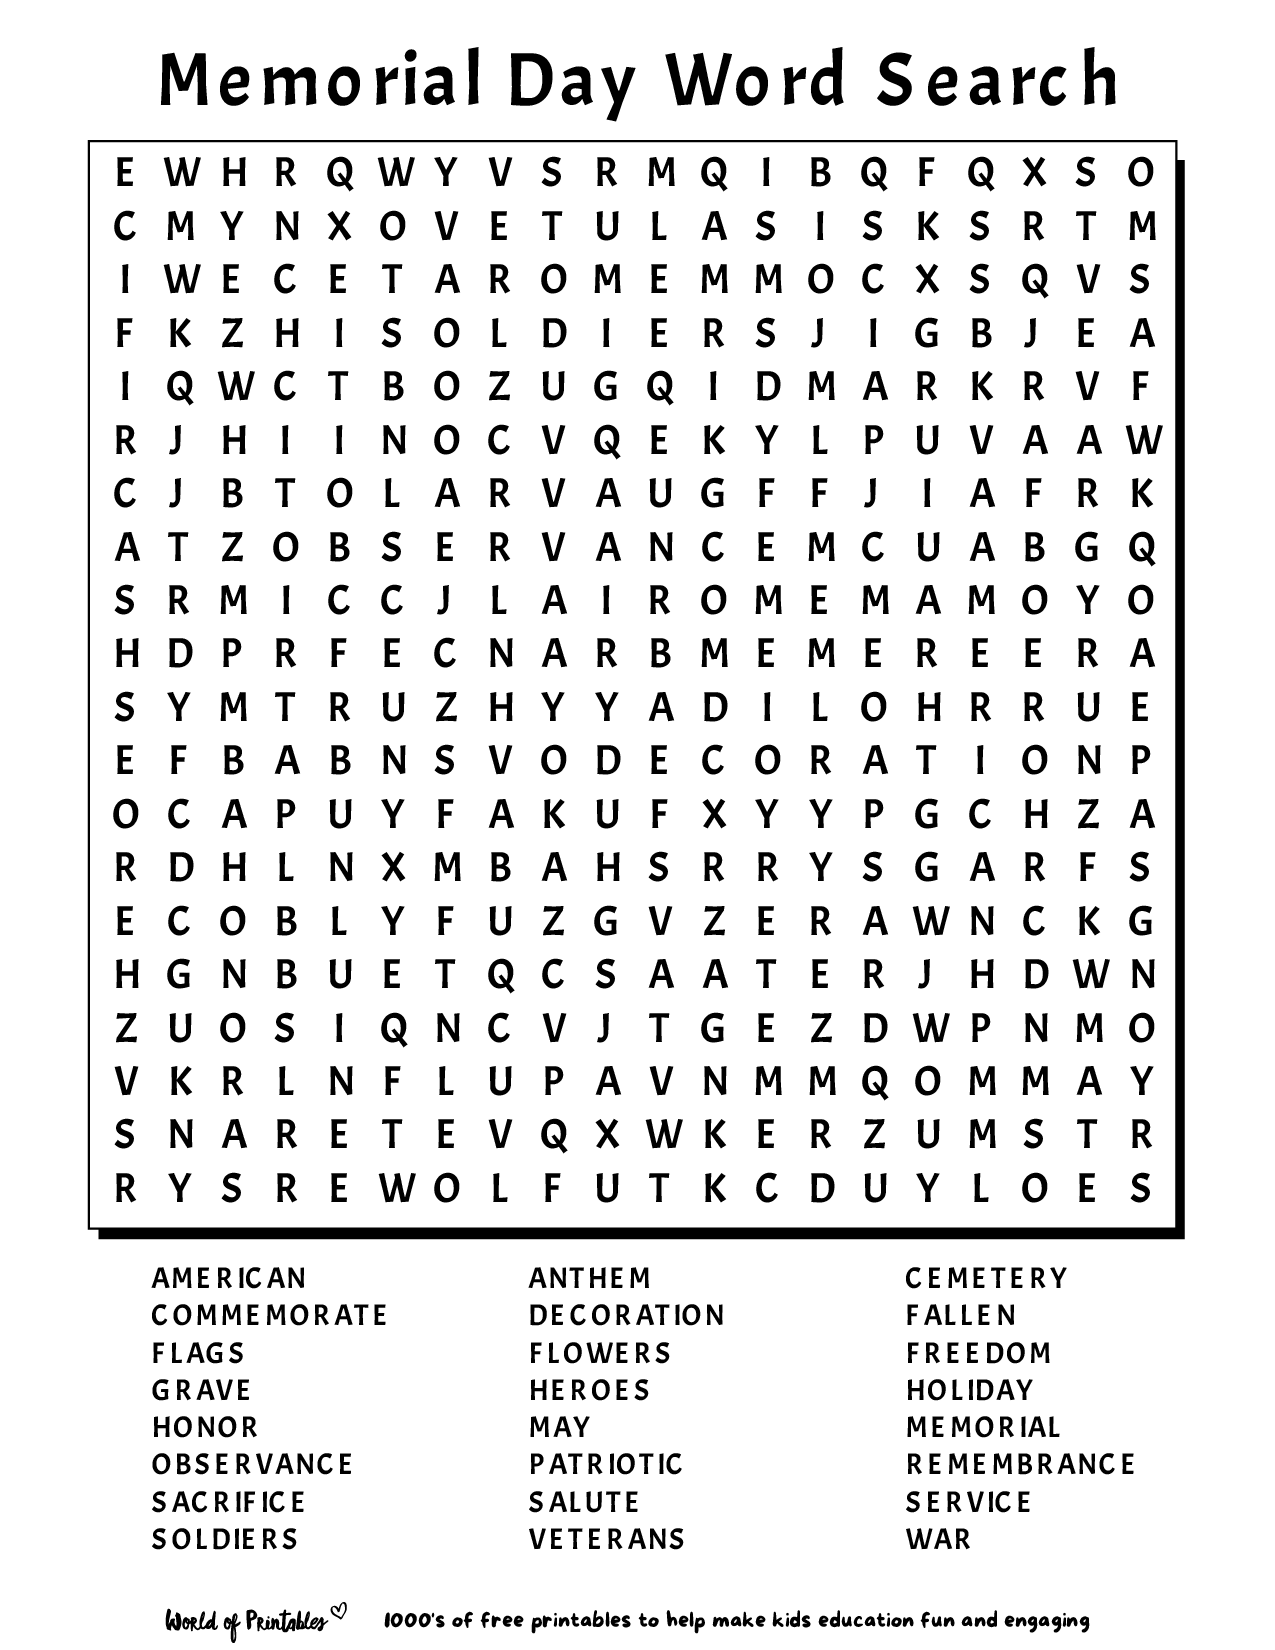 Memorial Day Word Search